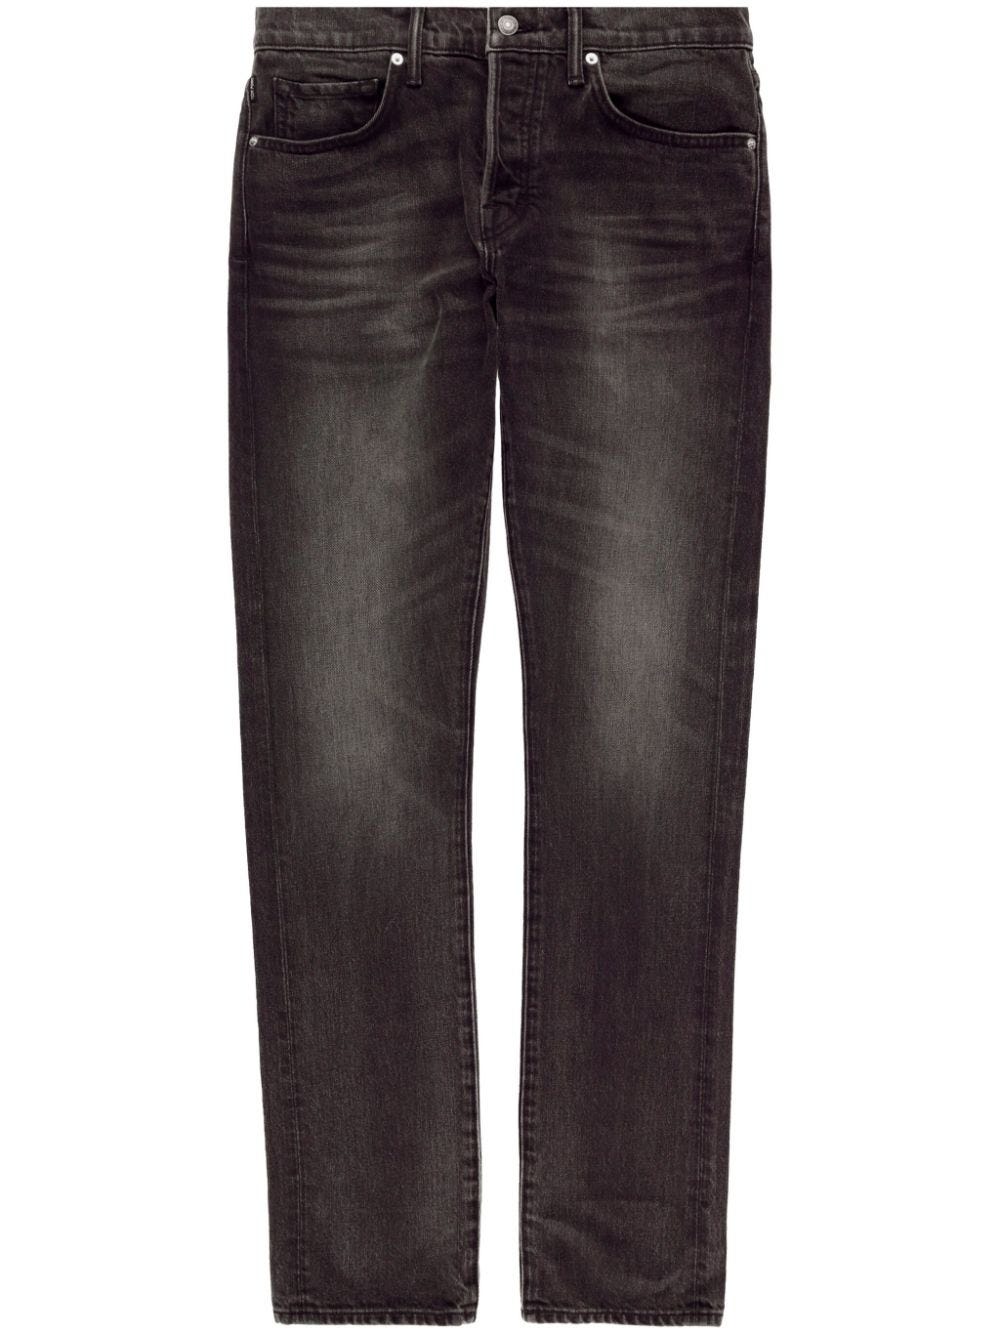 TOM FORD MID-RISE SLIM-FIT JEANS